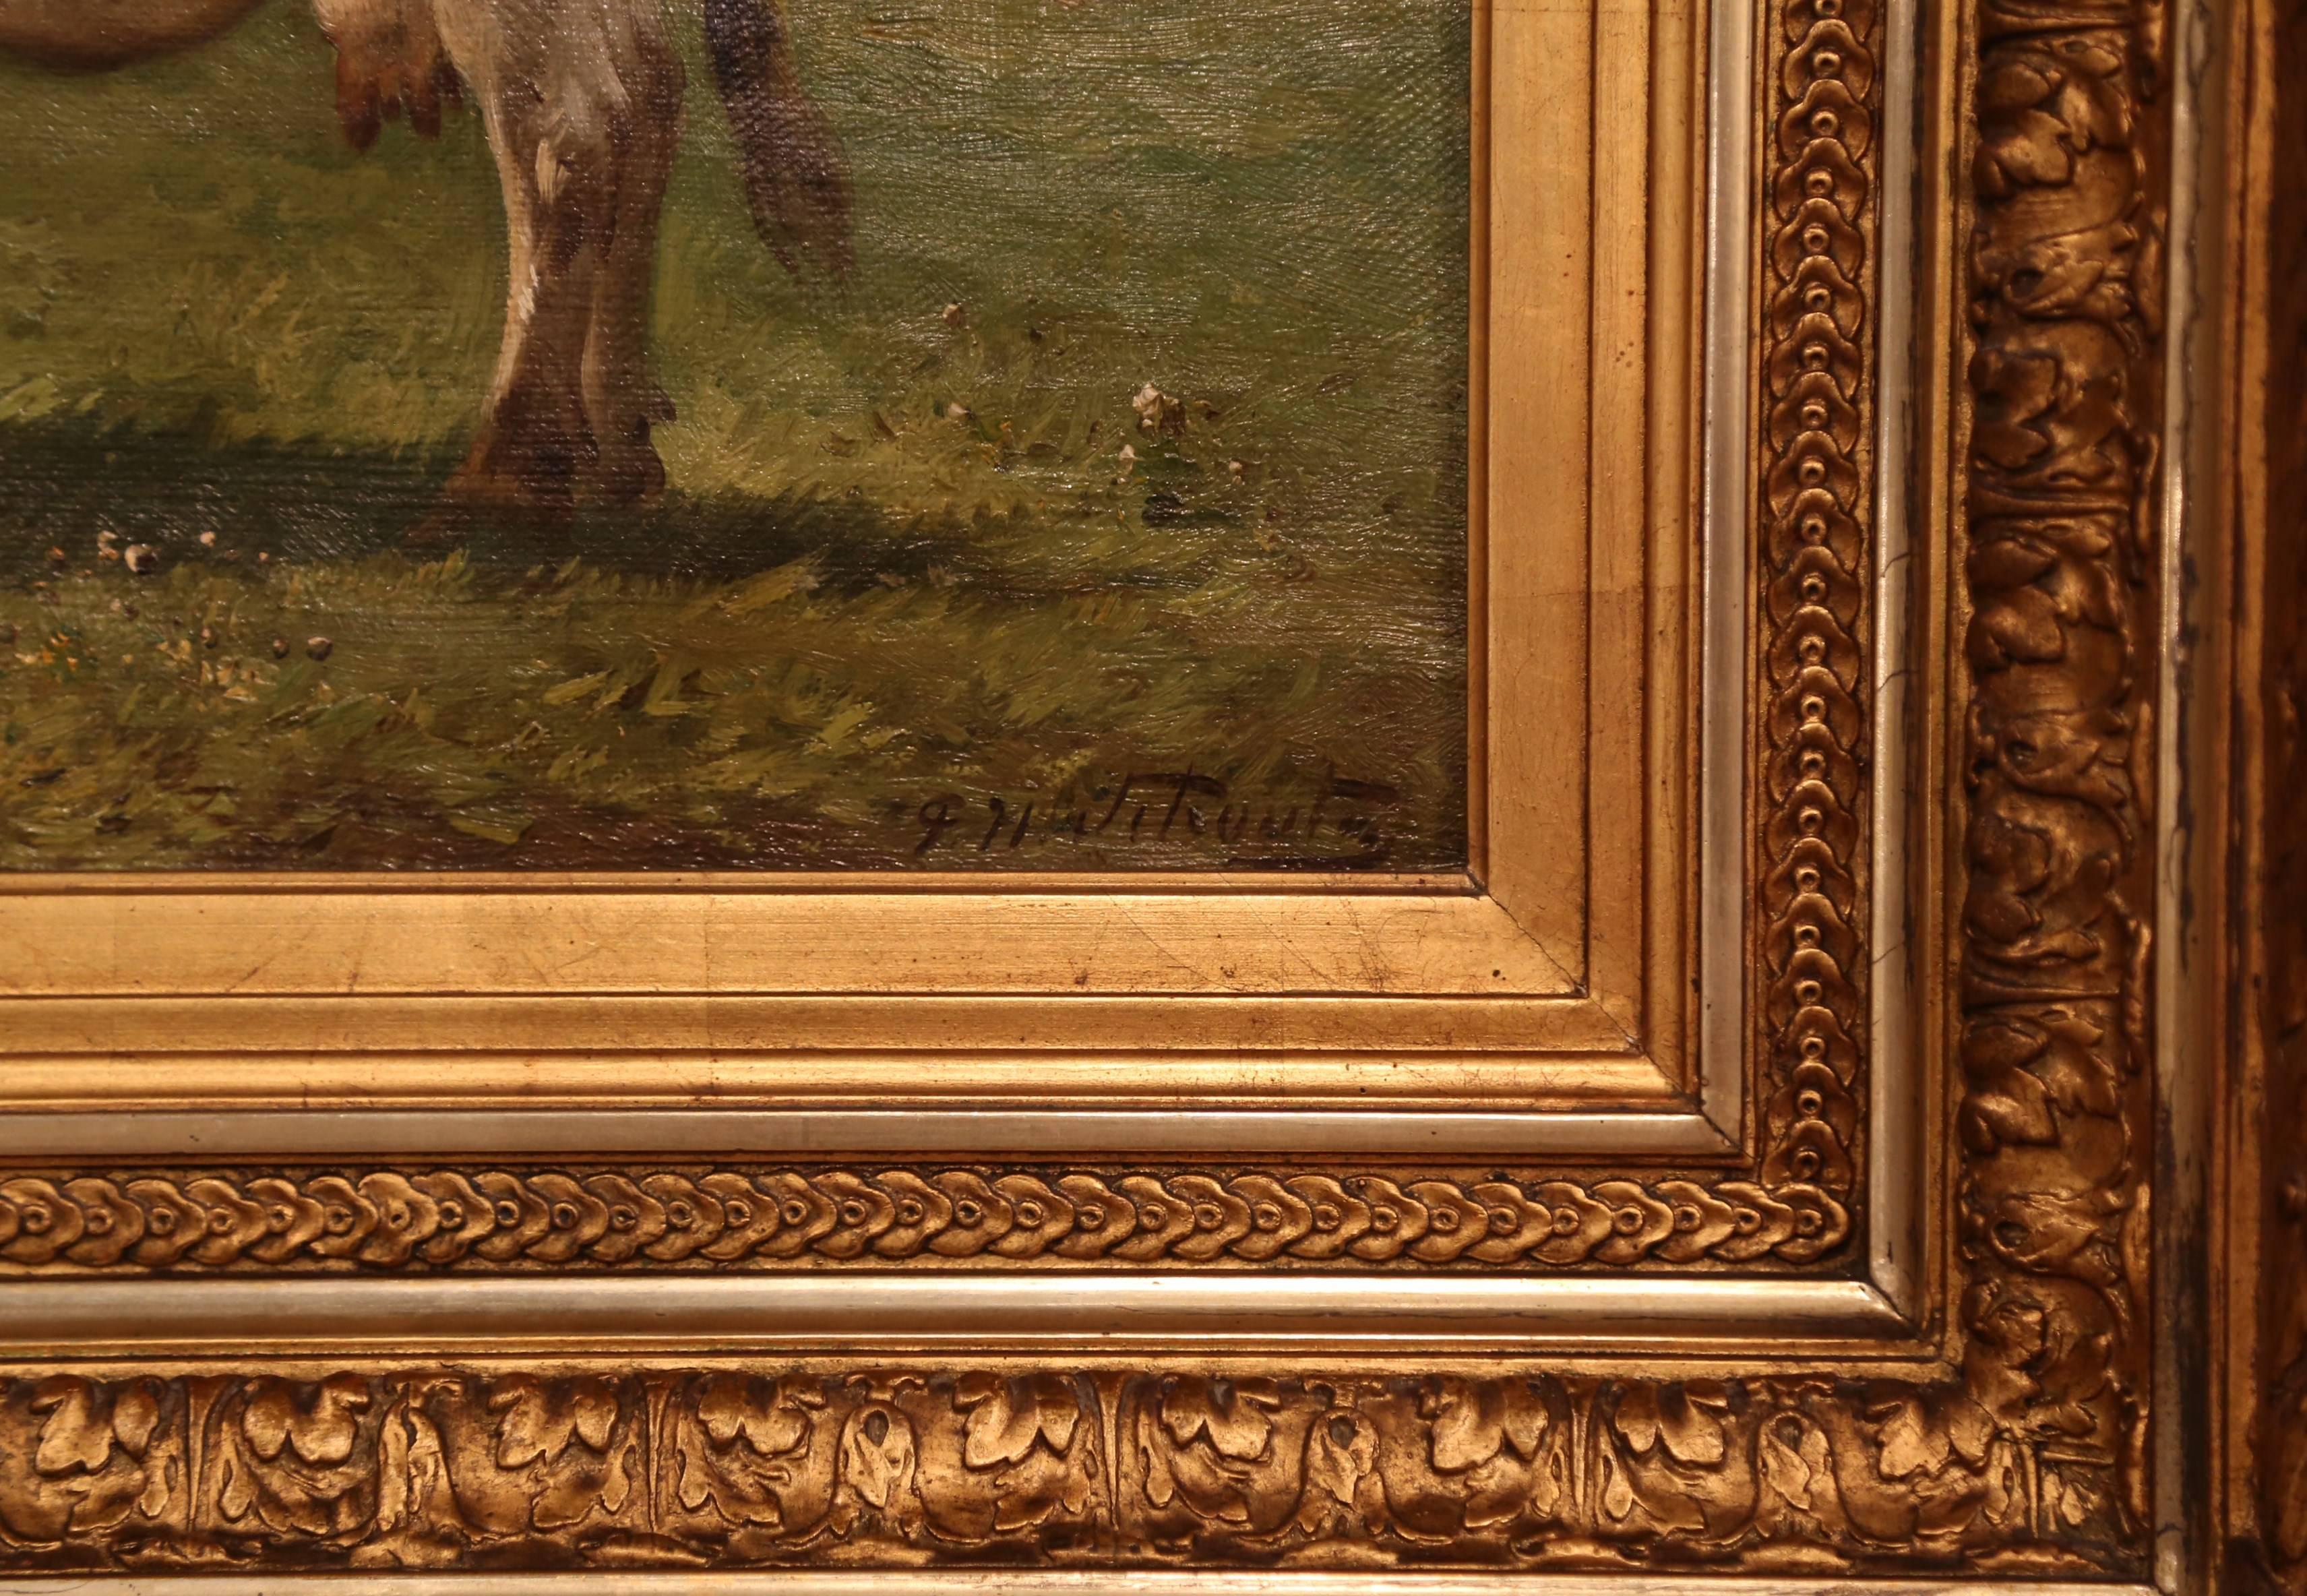 19th Century Gilt Framed Oil on Canvas Cow Painting Signed Paul Henri Schouten - Brown Animal Painting by Paul Schouten